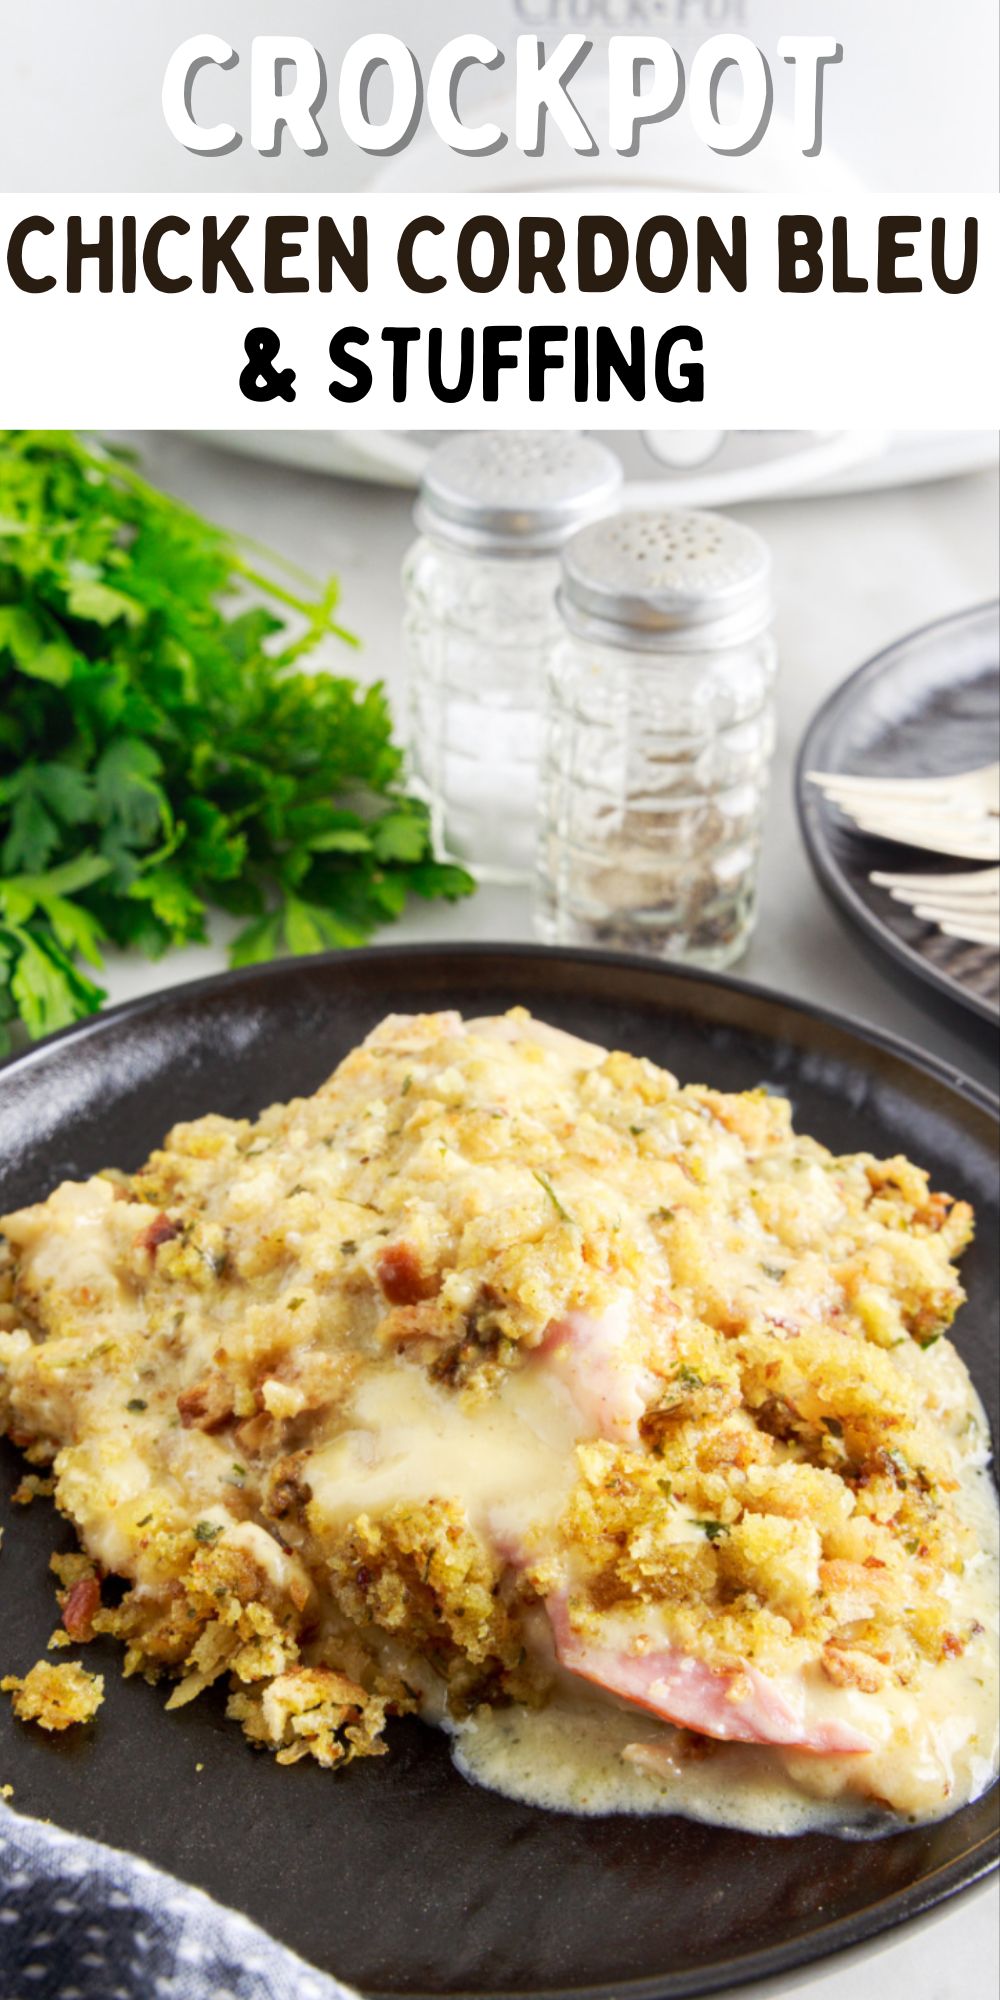 Crockpot Chicken Cordon Bleu with Stuffing recipe might be hard to say, but it's incredibly easy to make, thanks to your slow cooker! via @familyfresh